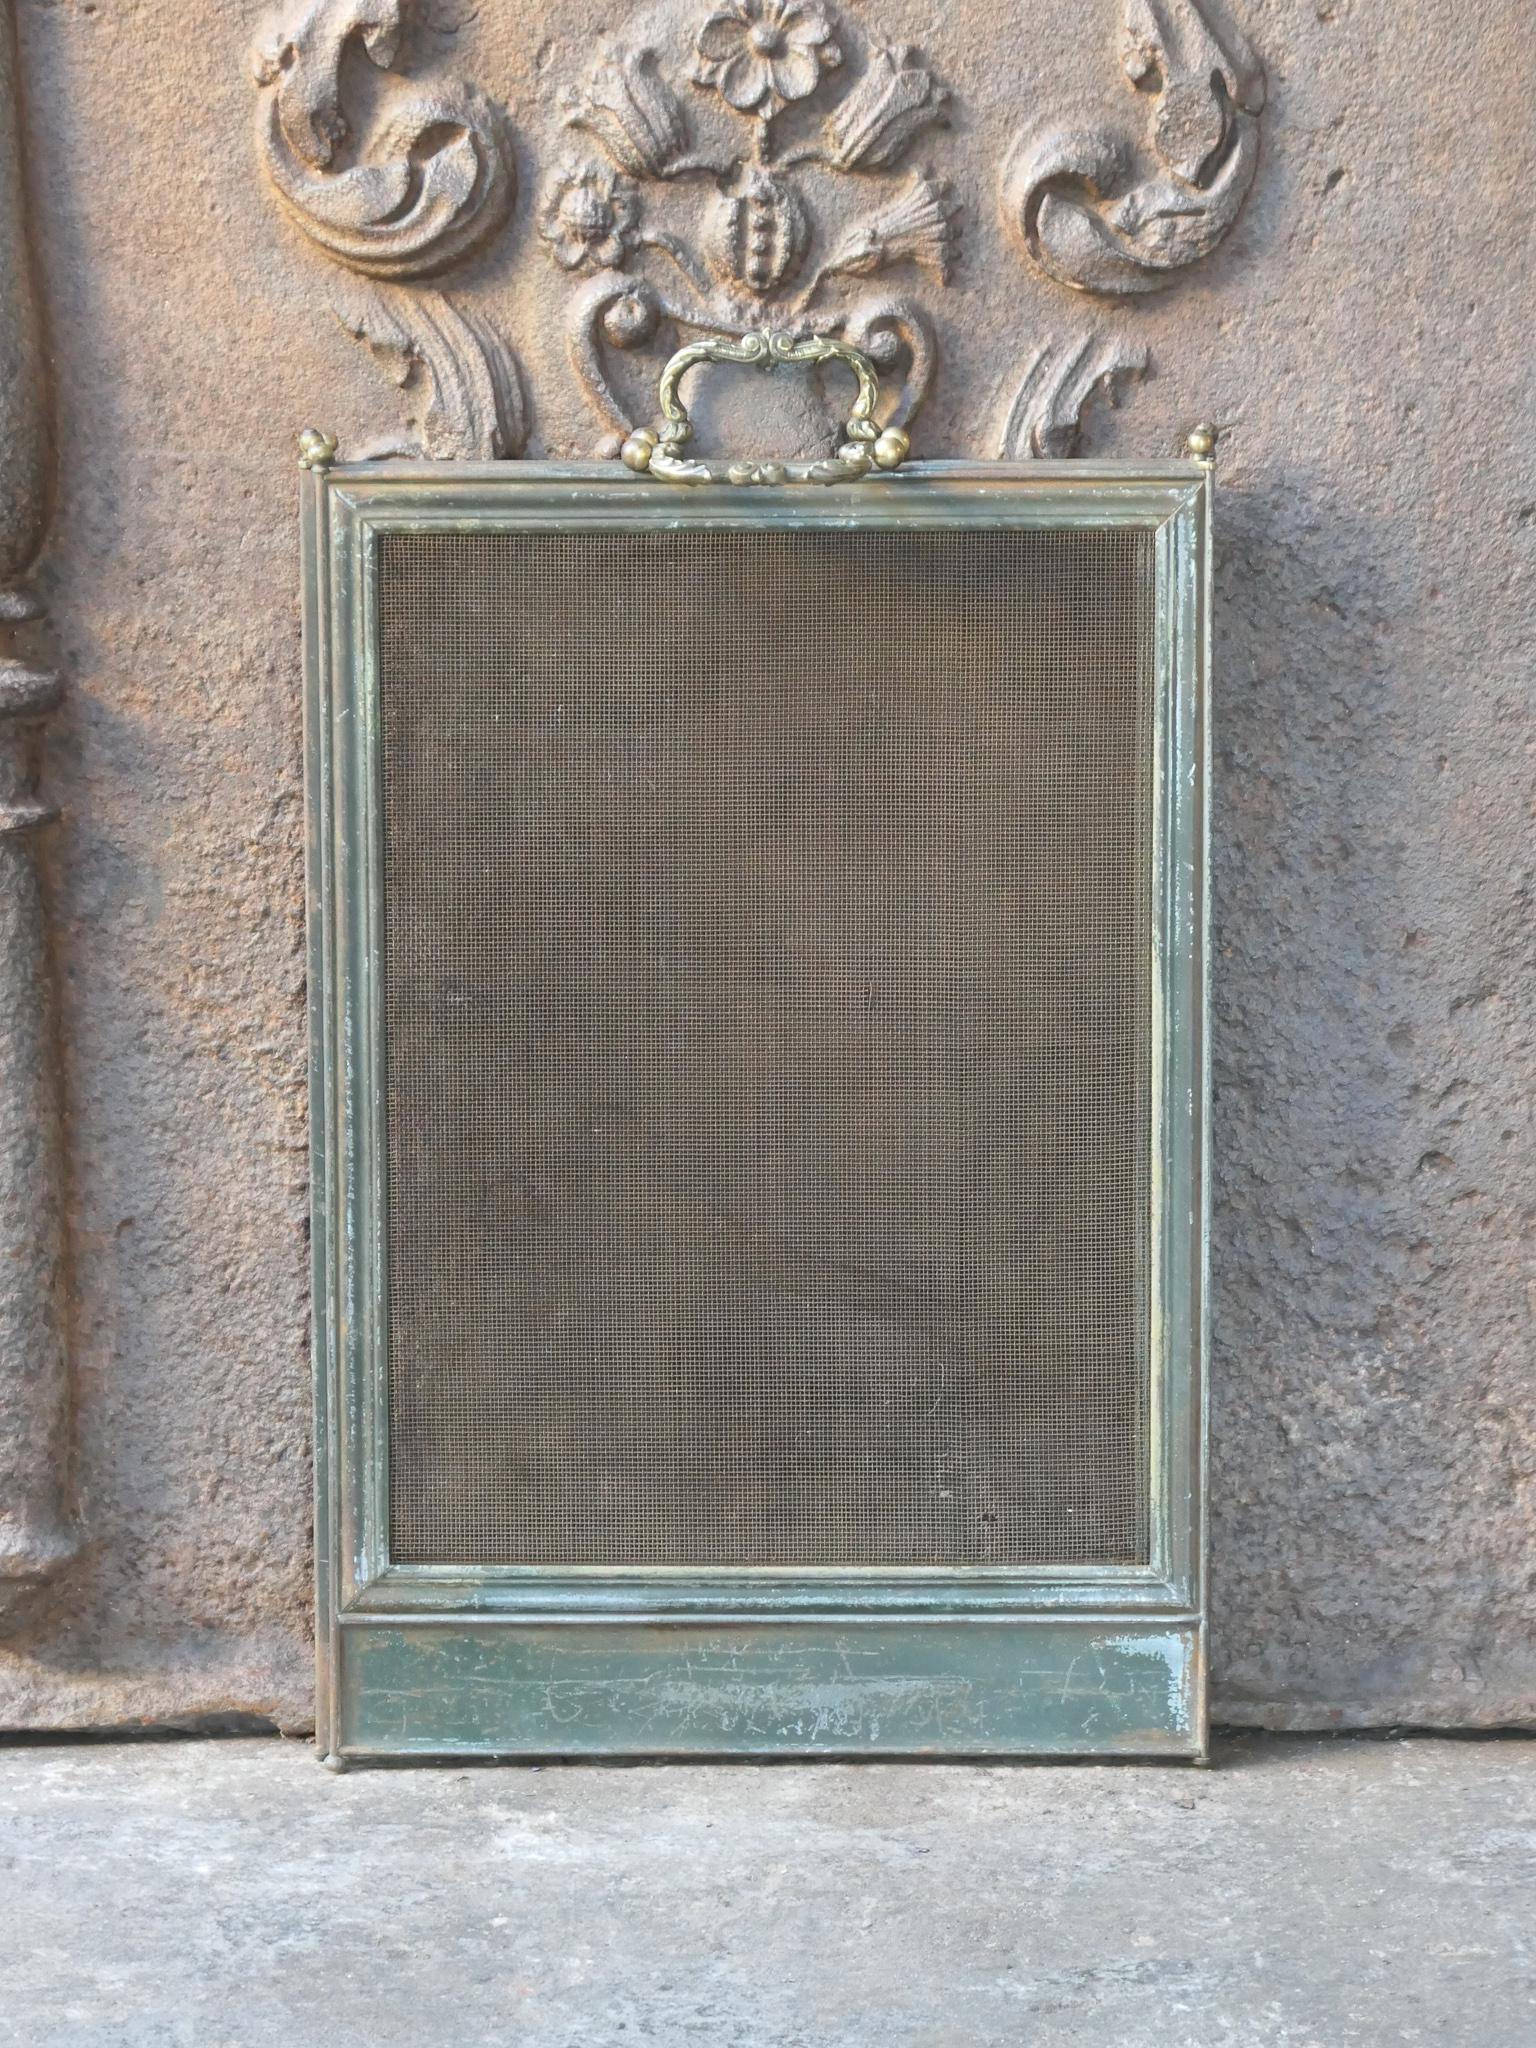 19th - 20th century French Napoleon III four-panel fireplace screen. The screen is made of brass, iron and iron mesh. It is in a good condition and is fit for use in front of the fireplace.